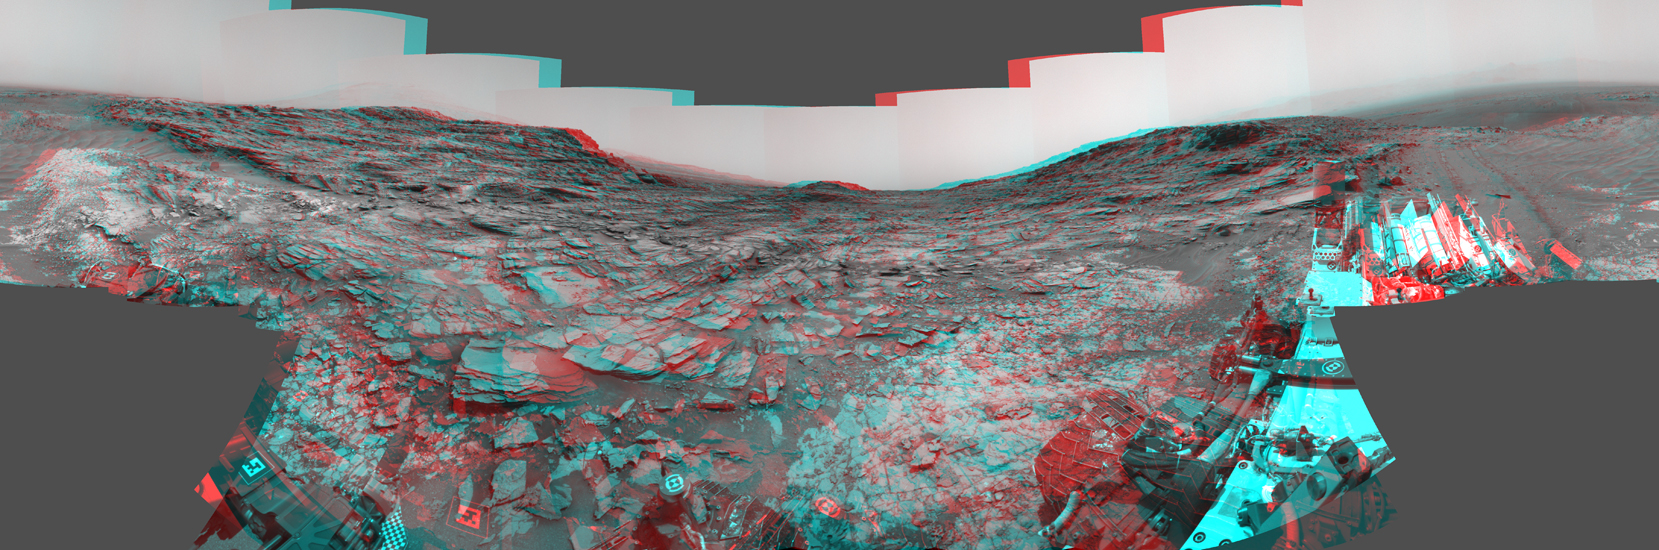 This stereo view from the Navigation Camera (Navcam) on NASA's Curiosity Mars rover shows a 360-degree panorama around the location where the rover spent its 1,000th Martian day, or sol, on Mars.